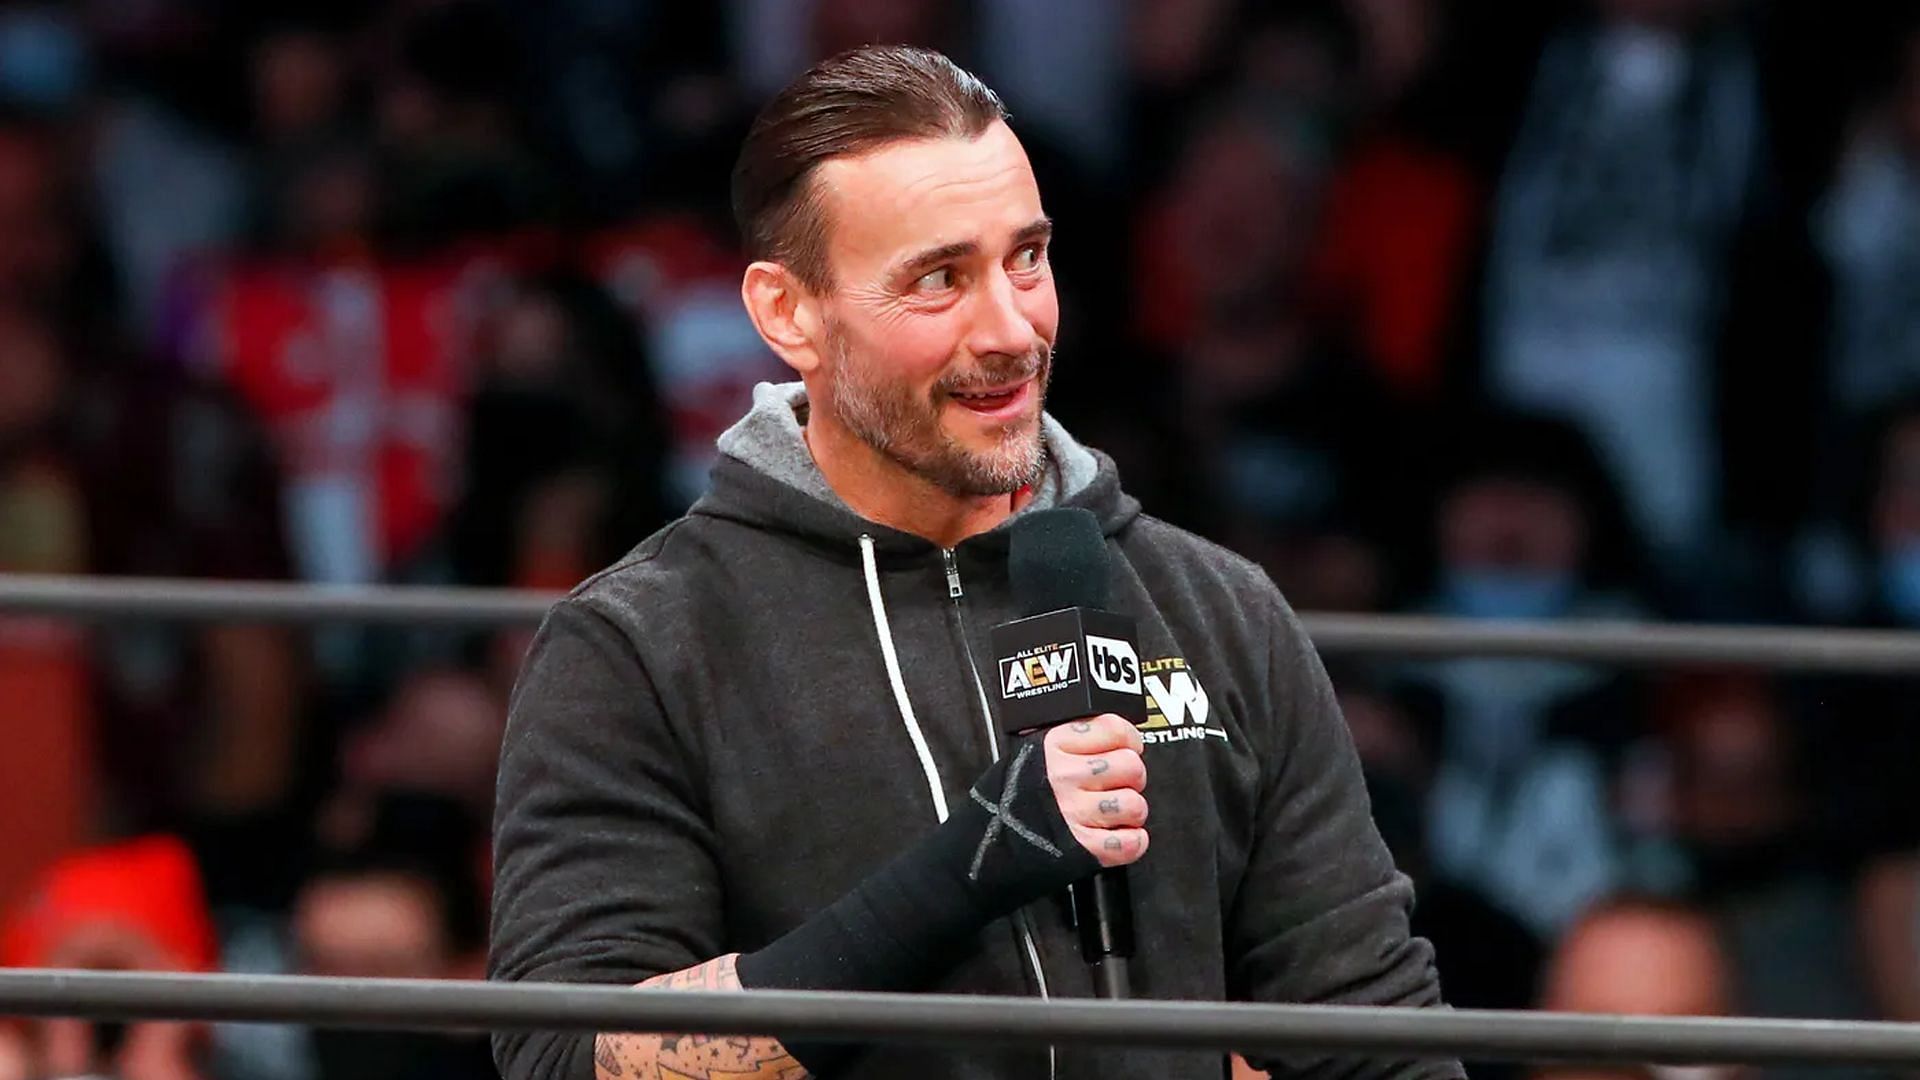 CM Punk is one of the top stars in AEW